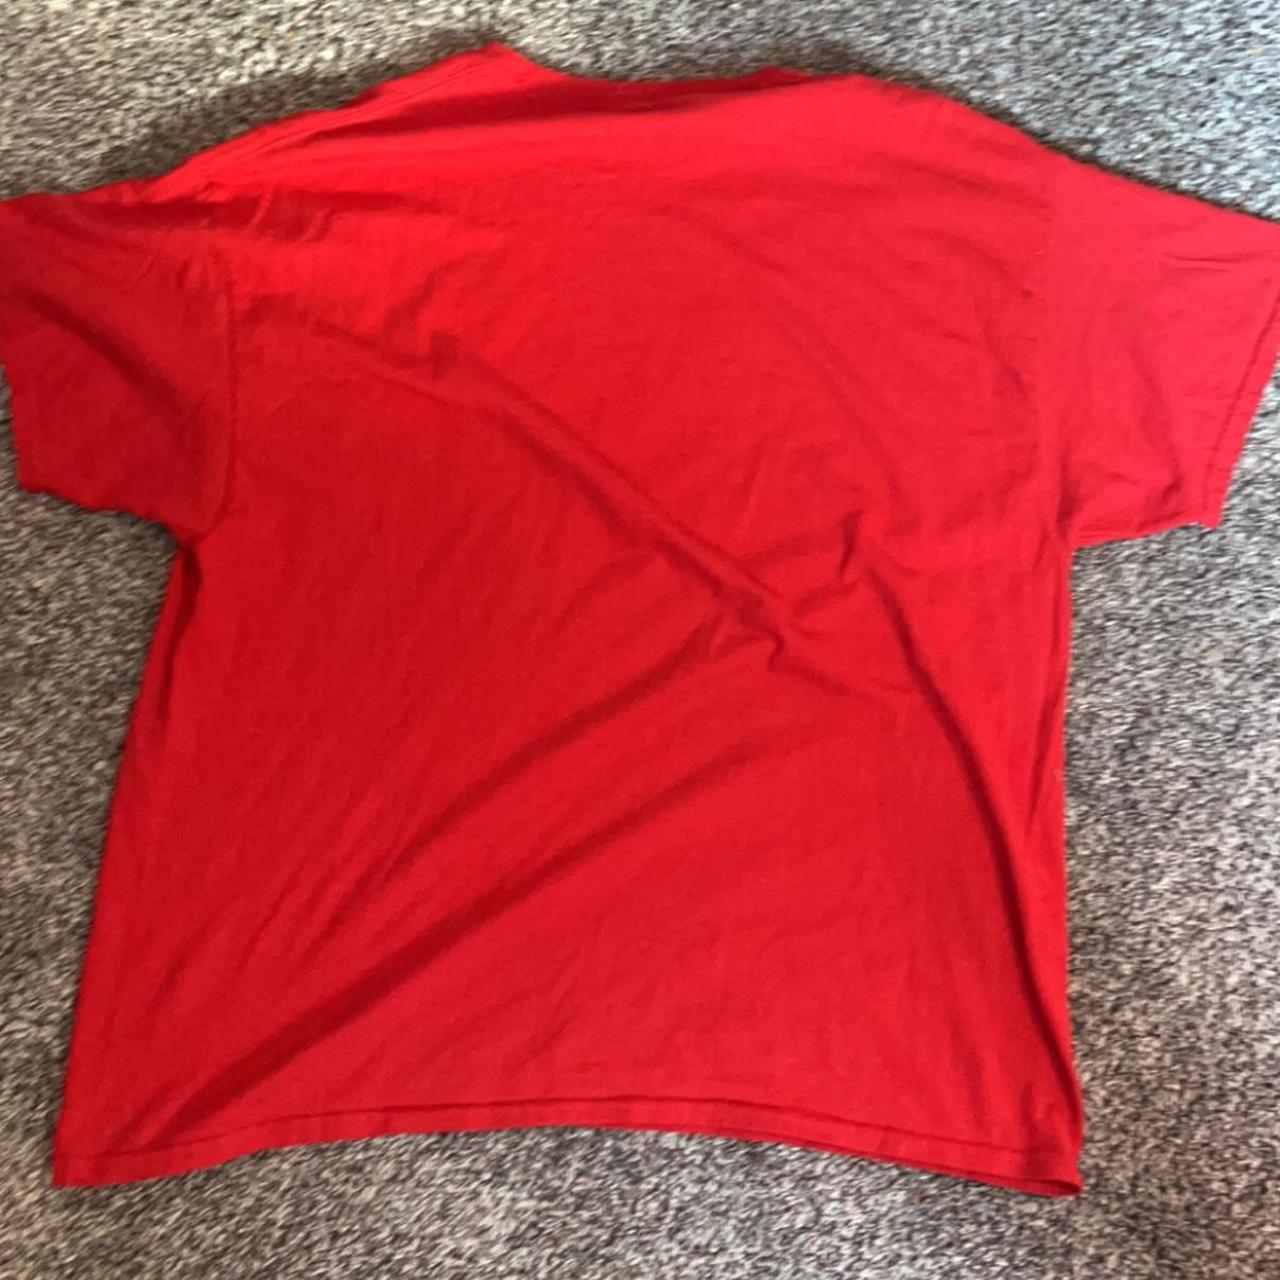 Alife Men's Red and Black T-shirt (2)